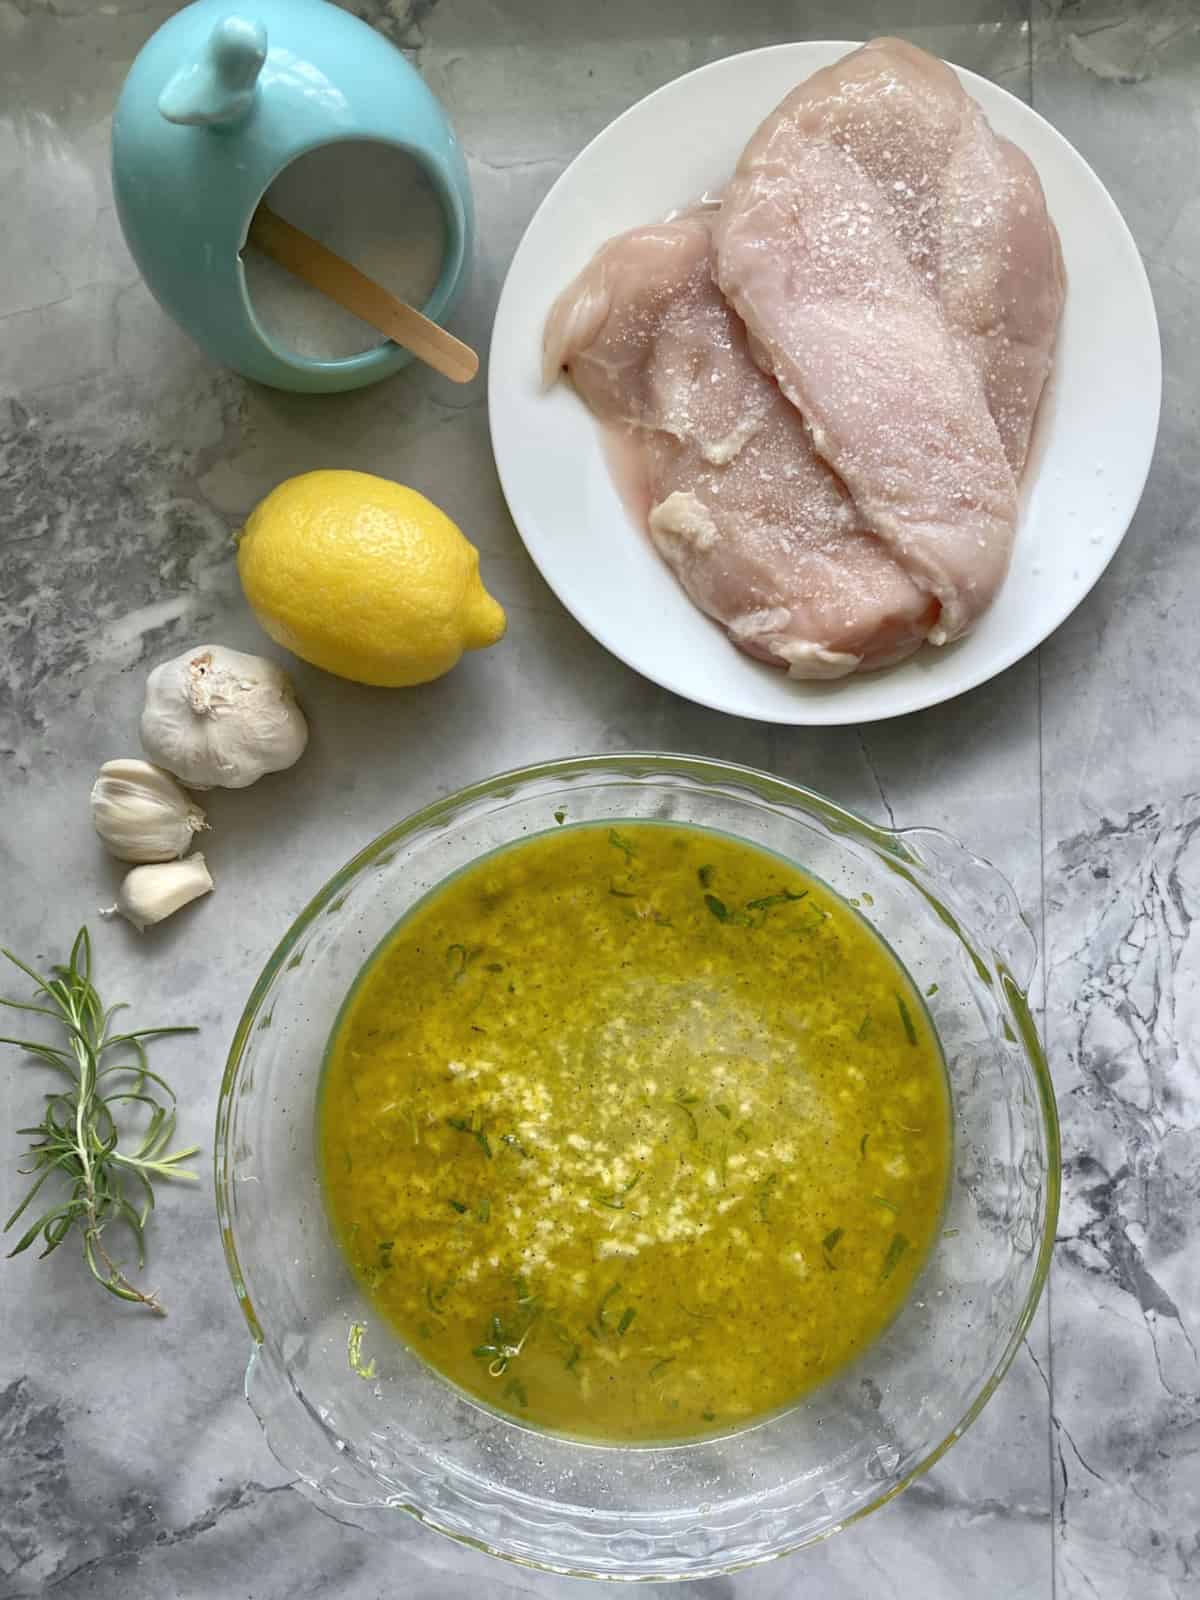 Salted raw chicken breast on a plate with lemon, garlic and a glass dish next to it.